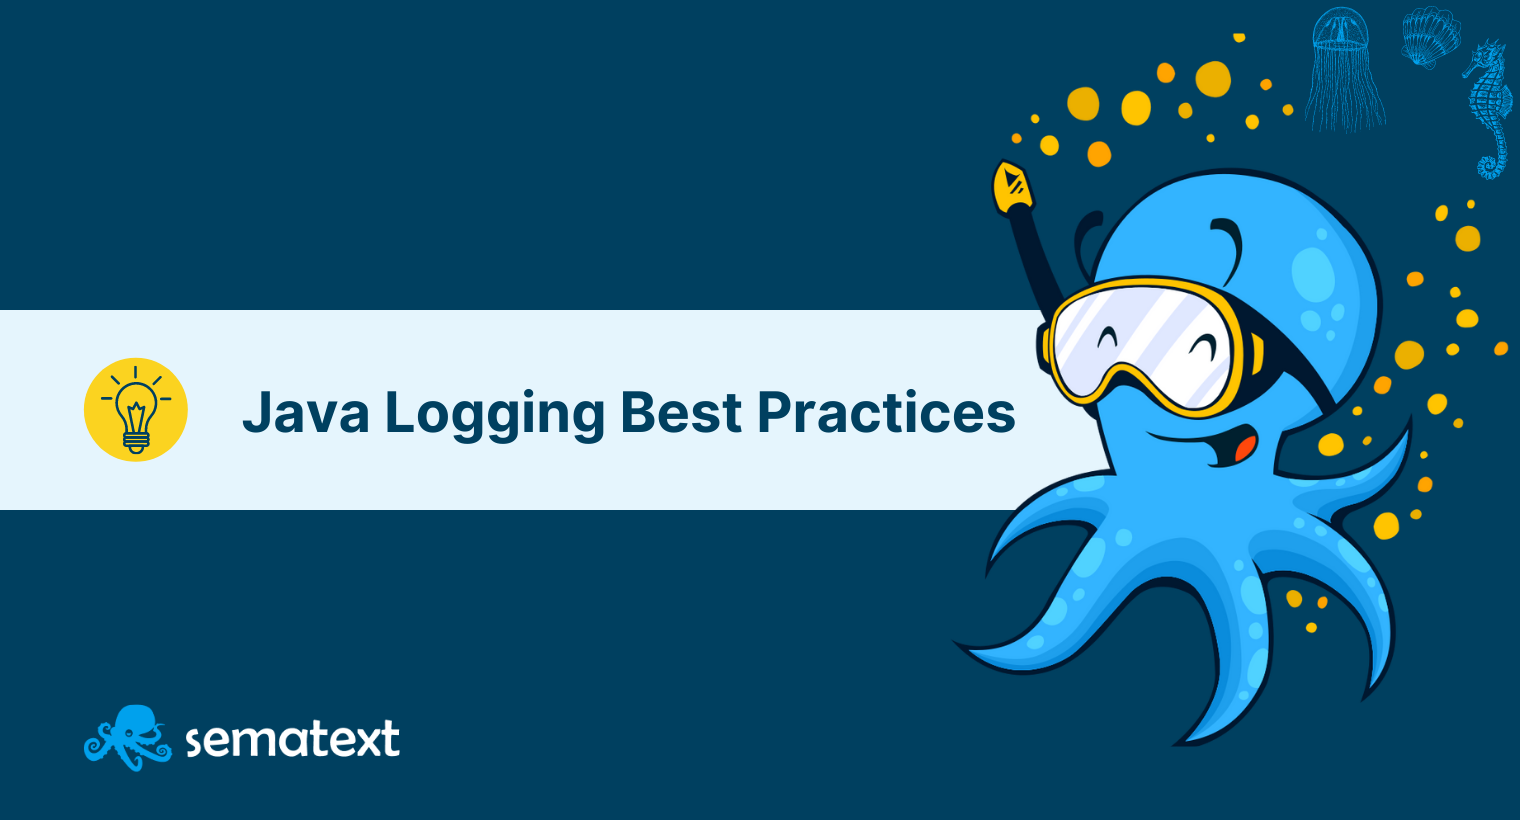 Java Logging Best Practices: 10+ Tips You Should Know to Get the Most Out of Your Logs